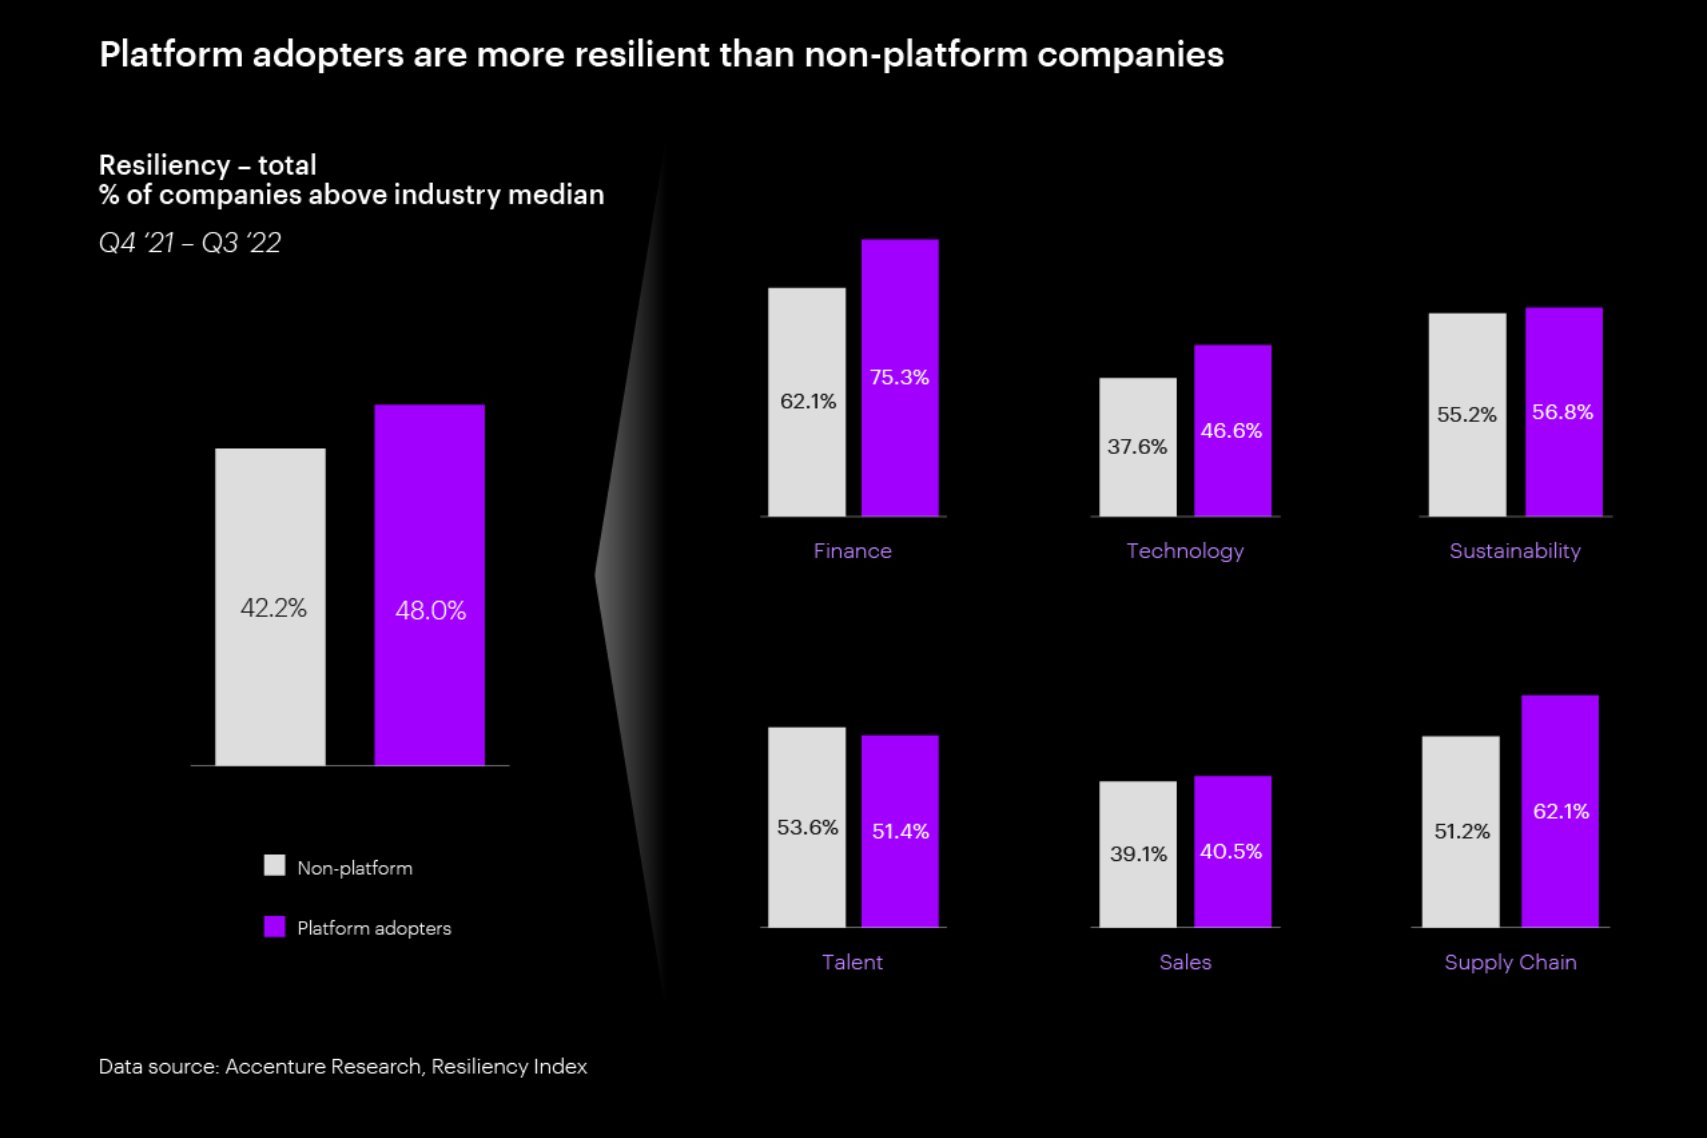 Platform adopters are more resilient than non-platform companies